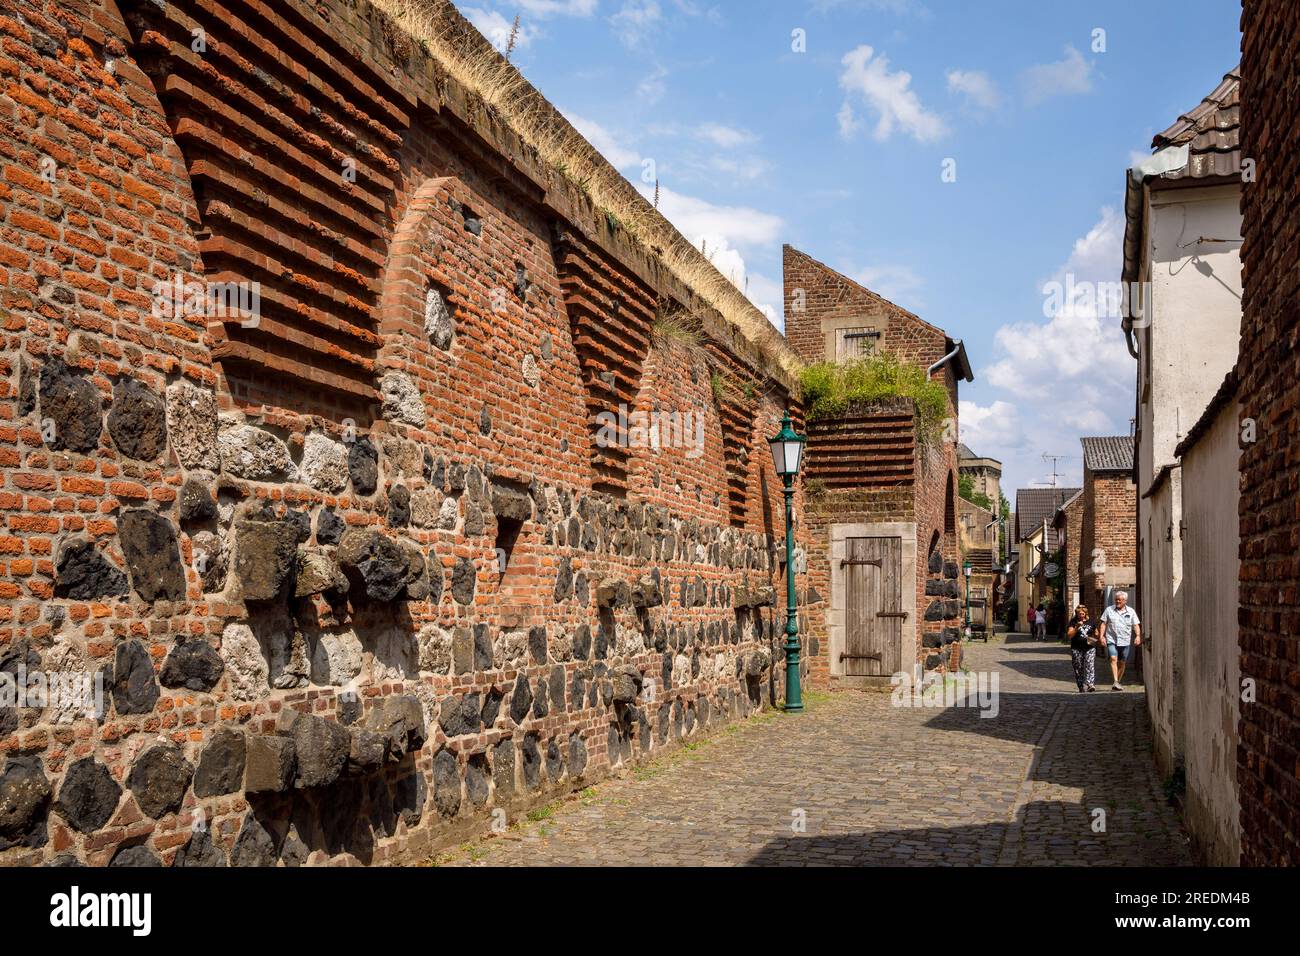 the old nothern town wall on Mauer street in Zons on the river Rhine, North Rhine-Westphalia, Germany die alte noerdliche Stadtmauer an der Mauerstras Stock Photo